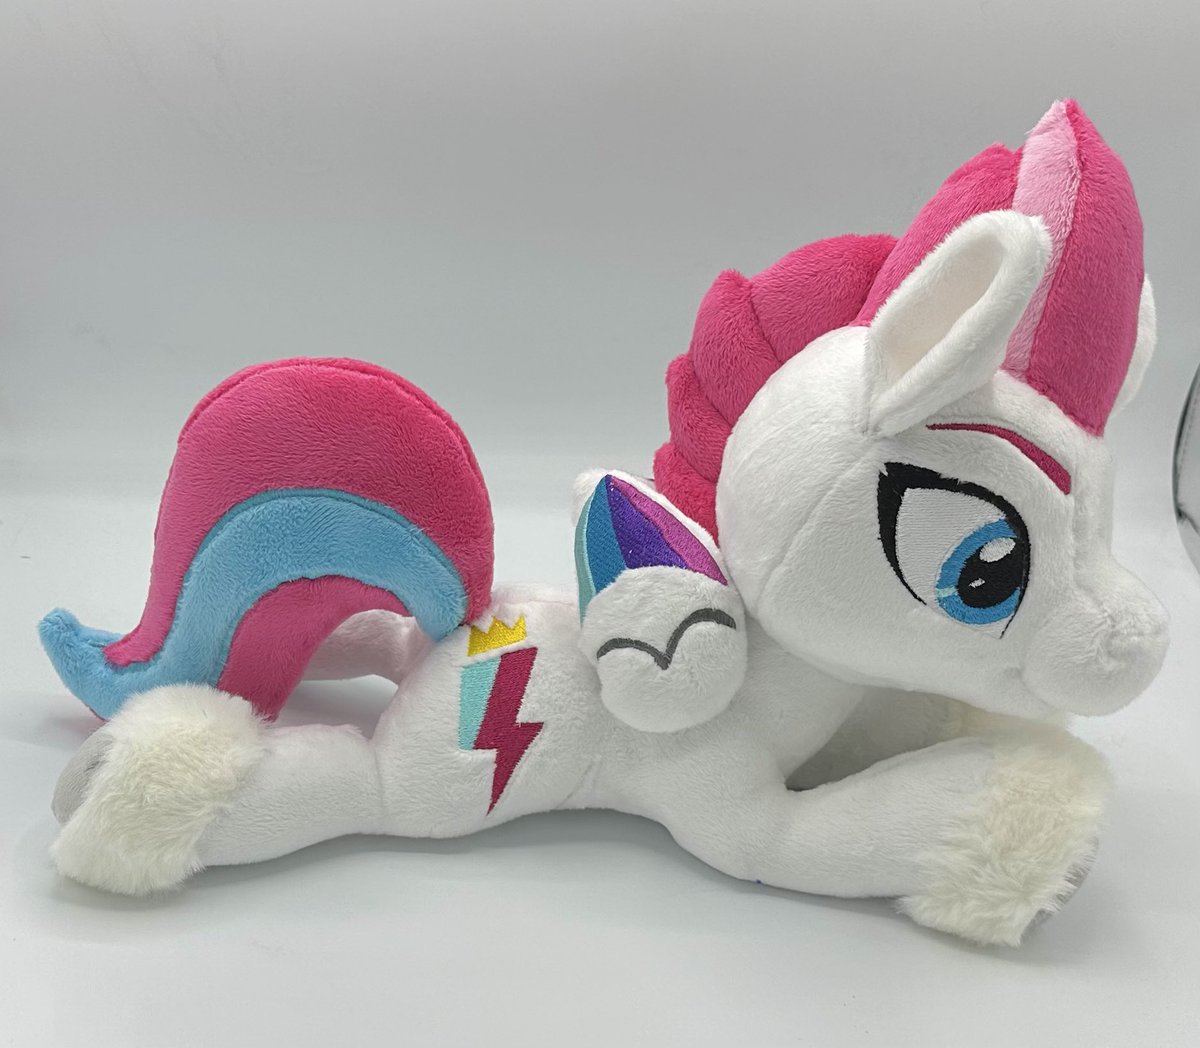 A #zippstorm #mylittlepony #plush I’ve been forgetting to post for MONTHS. I tried a laying pattern with her. I prefer standing for Zipp, but I’m still glad I tried this out! Credit: hibiscus stitch and lilsydesigns